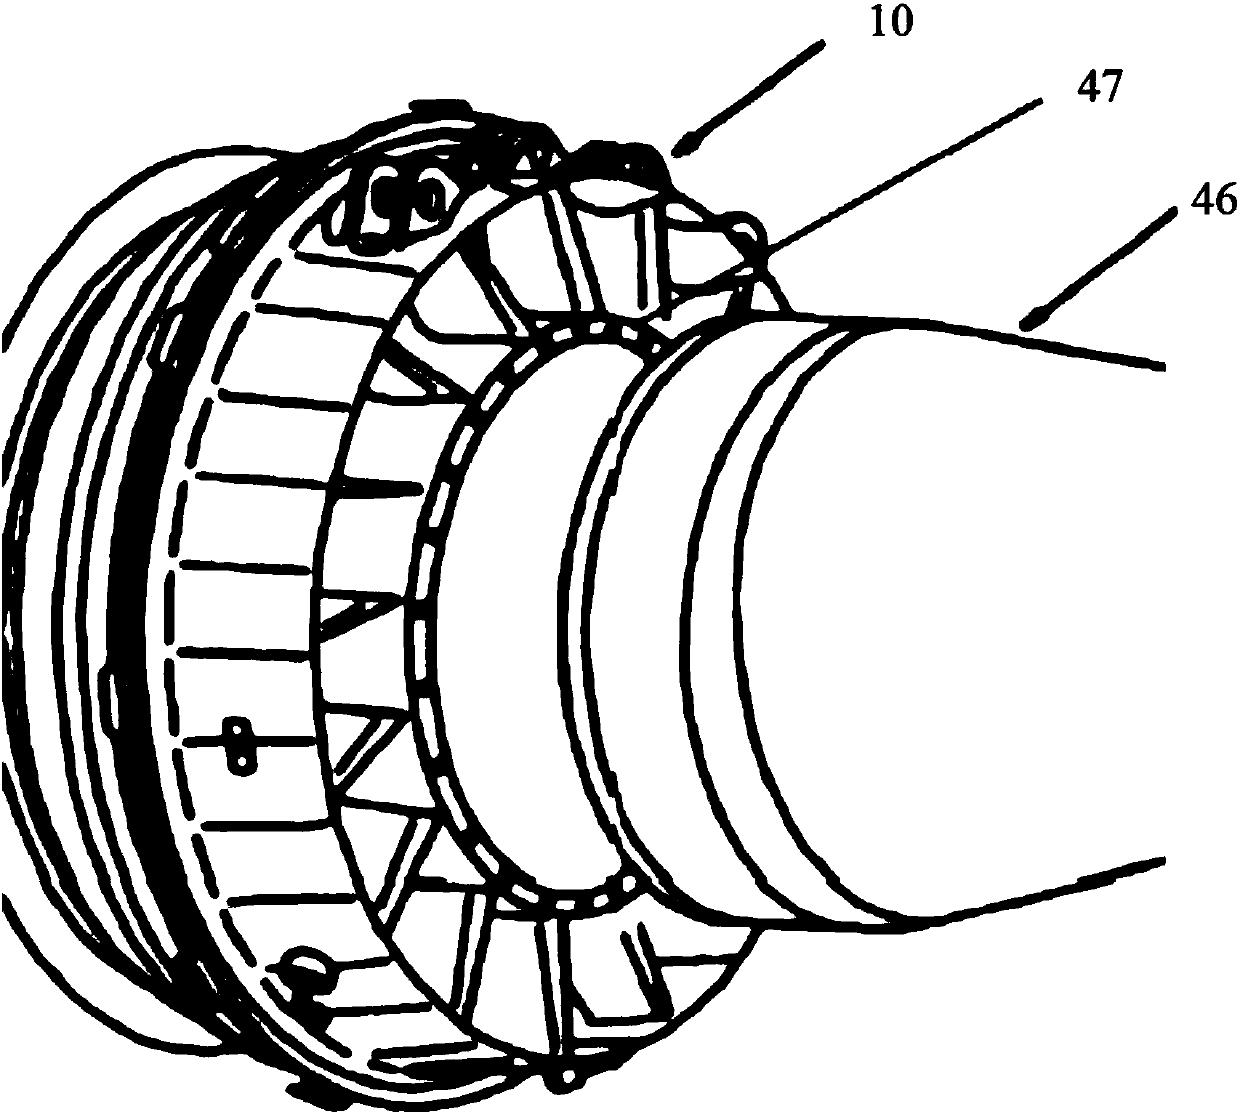 Connecting structure, and exhaust system of aero-engine comprising connecting structure